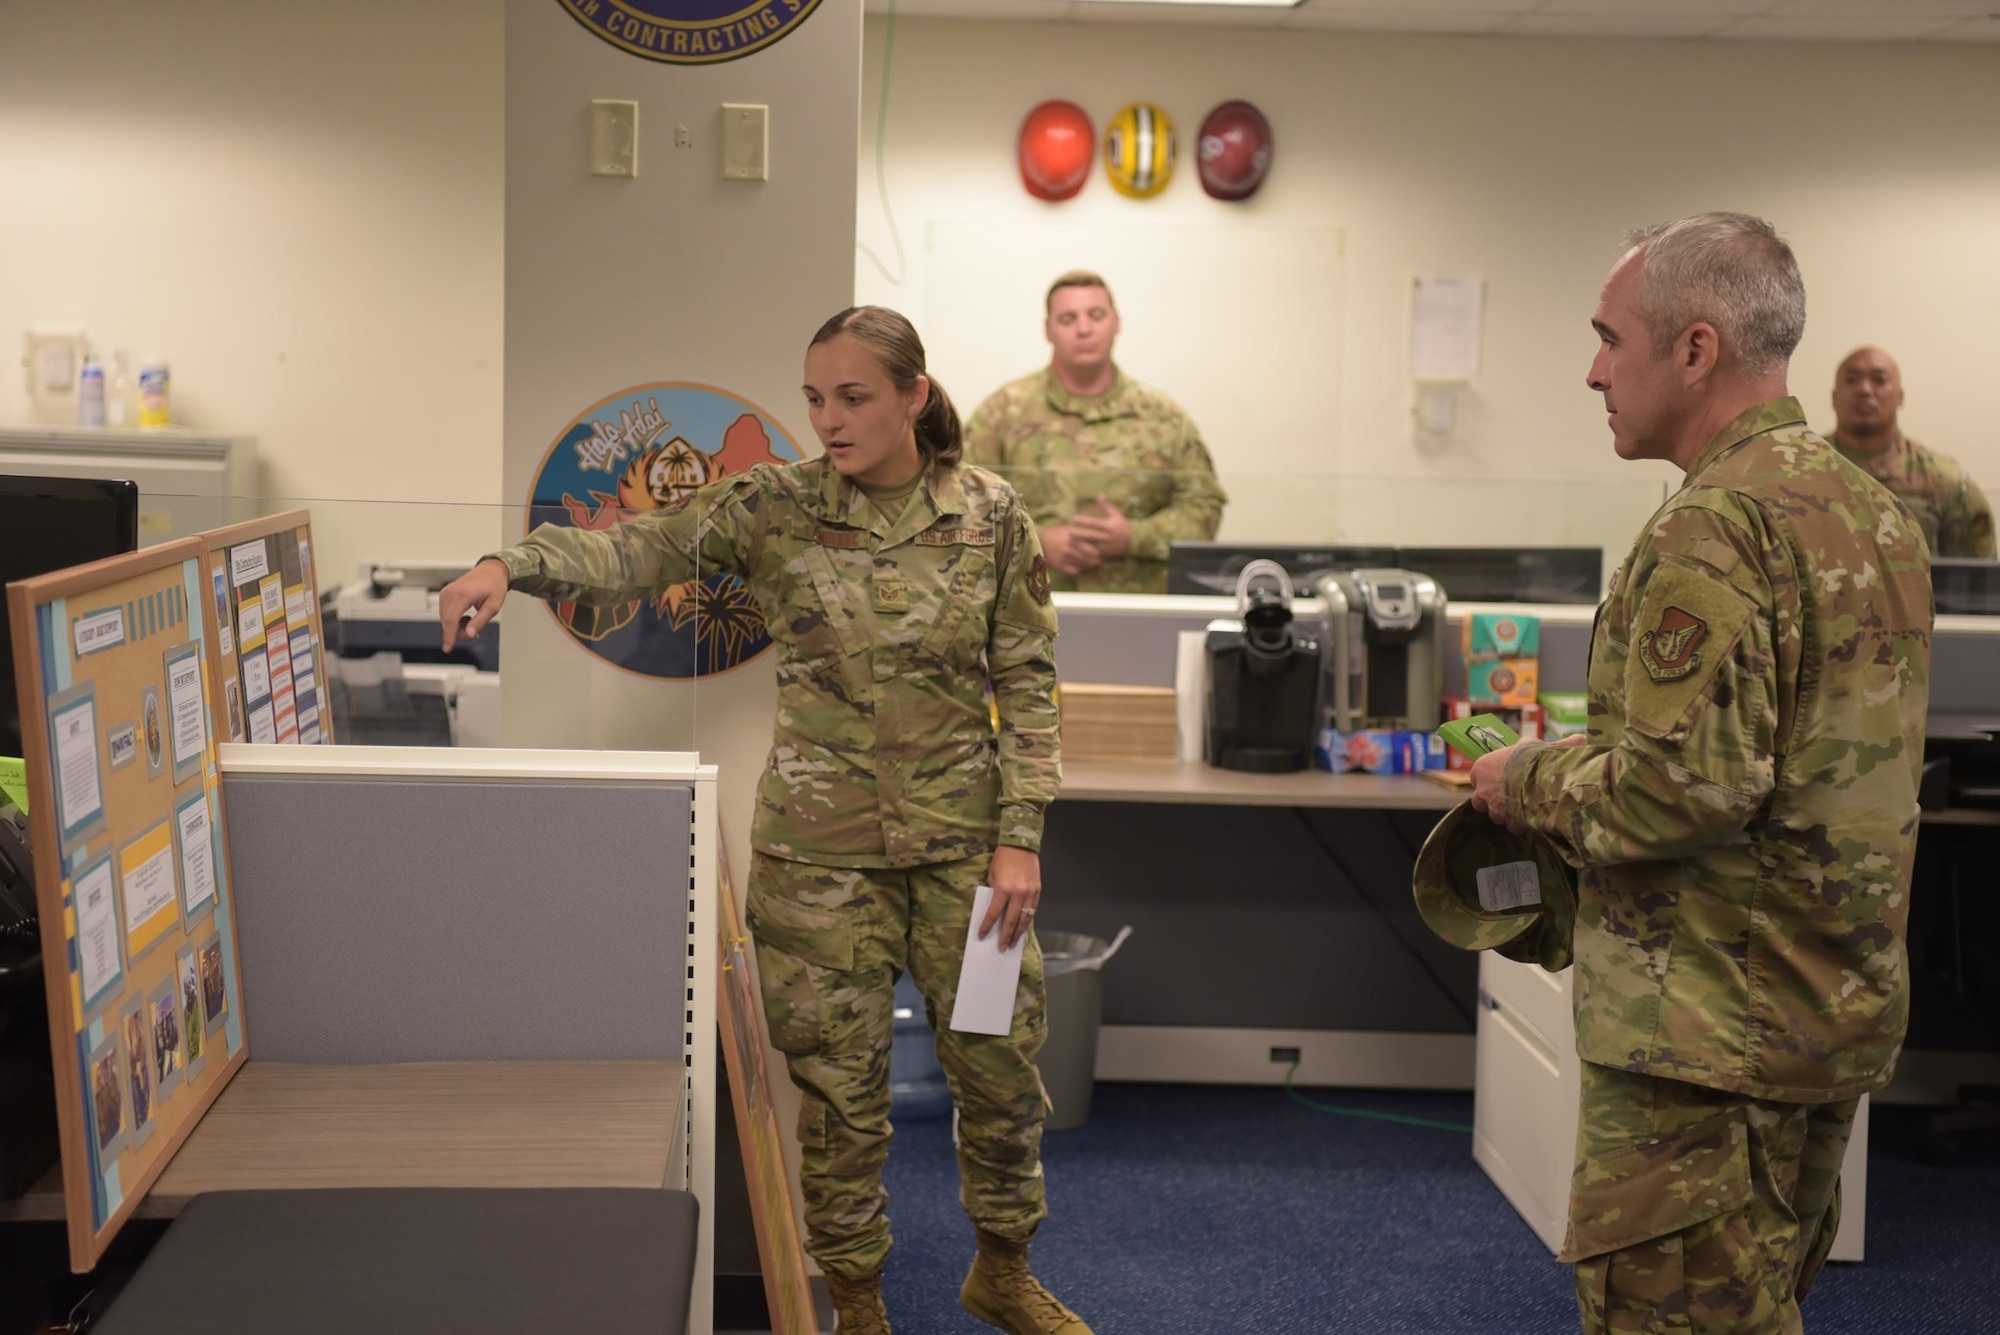 U.S. Air Force Chief Master Sgt. Kristopher Berg, 11th Air Force Command Chief, receives a brief about the 36th Contracting Squadron, June 7, 2021, at Andersen Air Force Base, Guam.